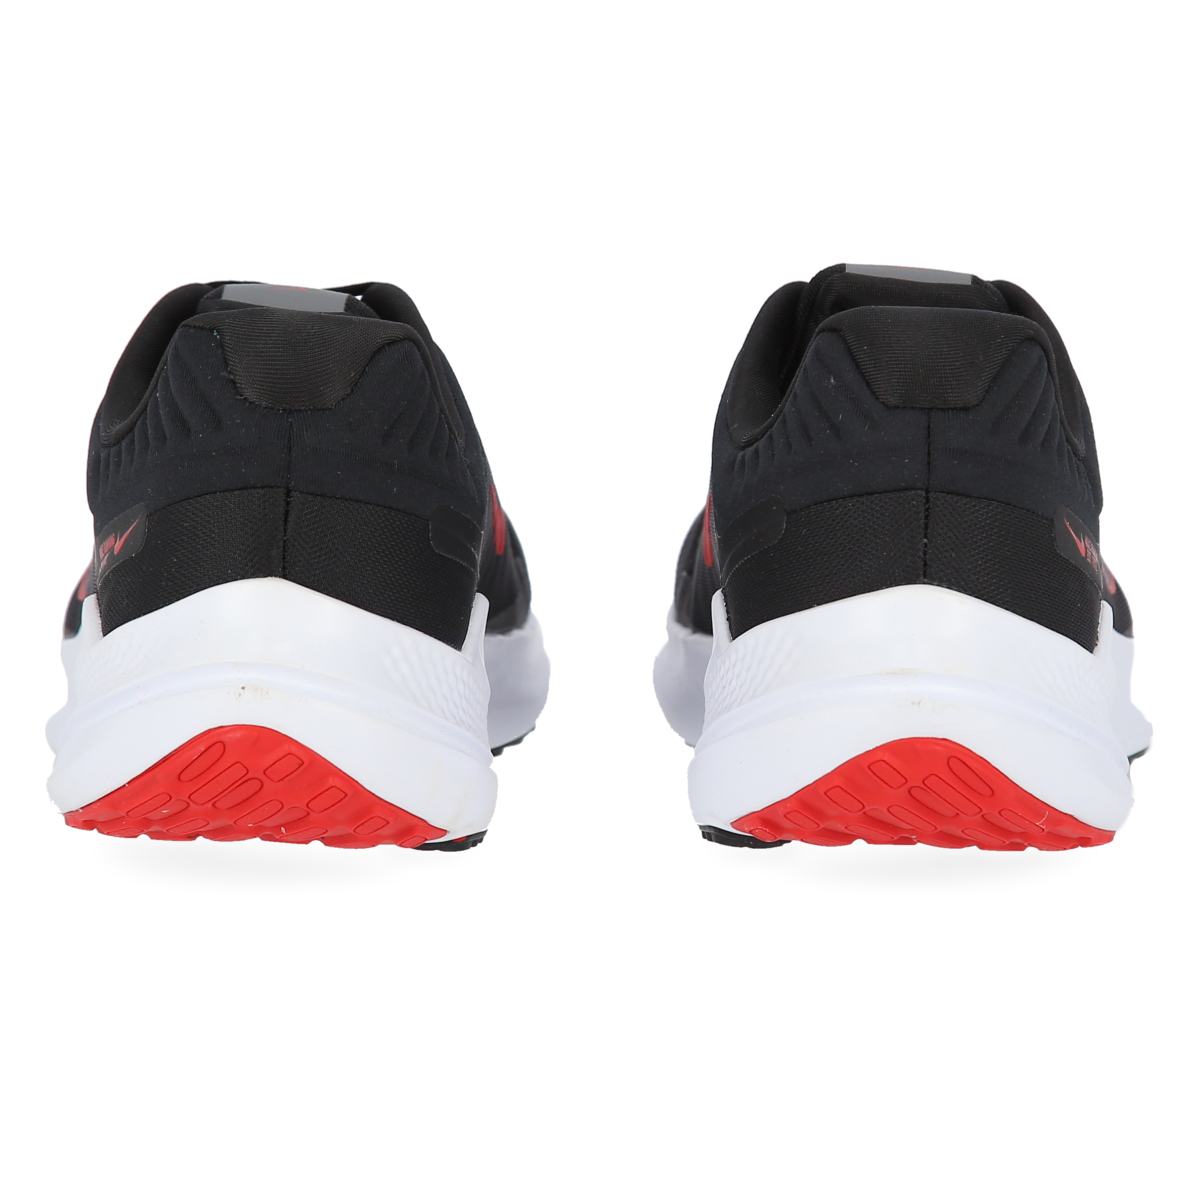 Zapatillas Nike Quest 5 Hombre,  image number null